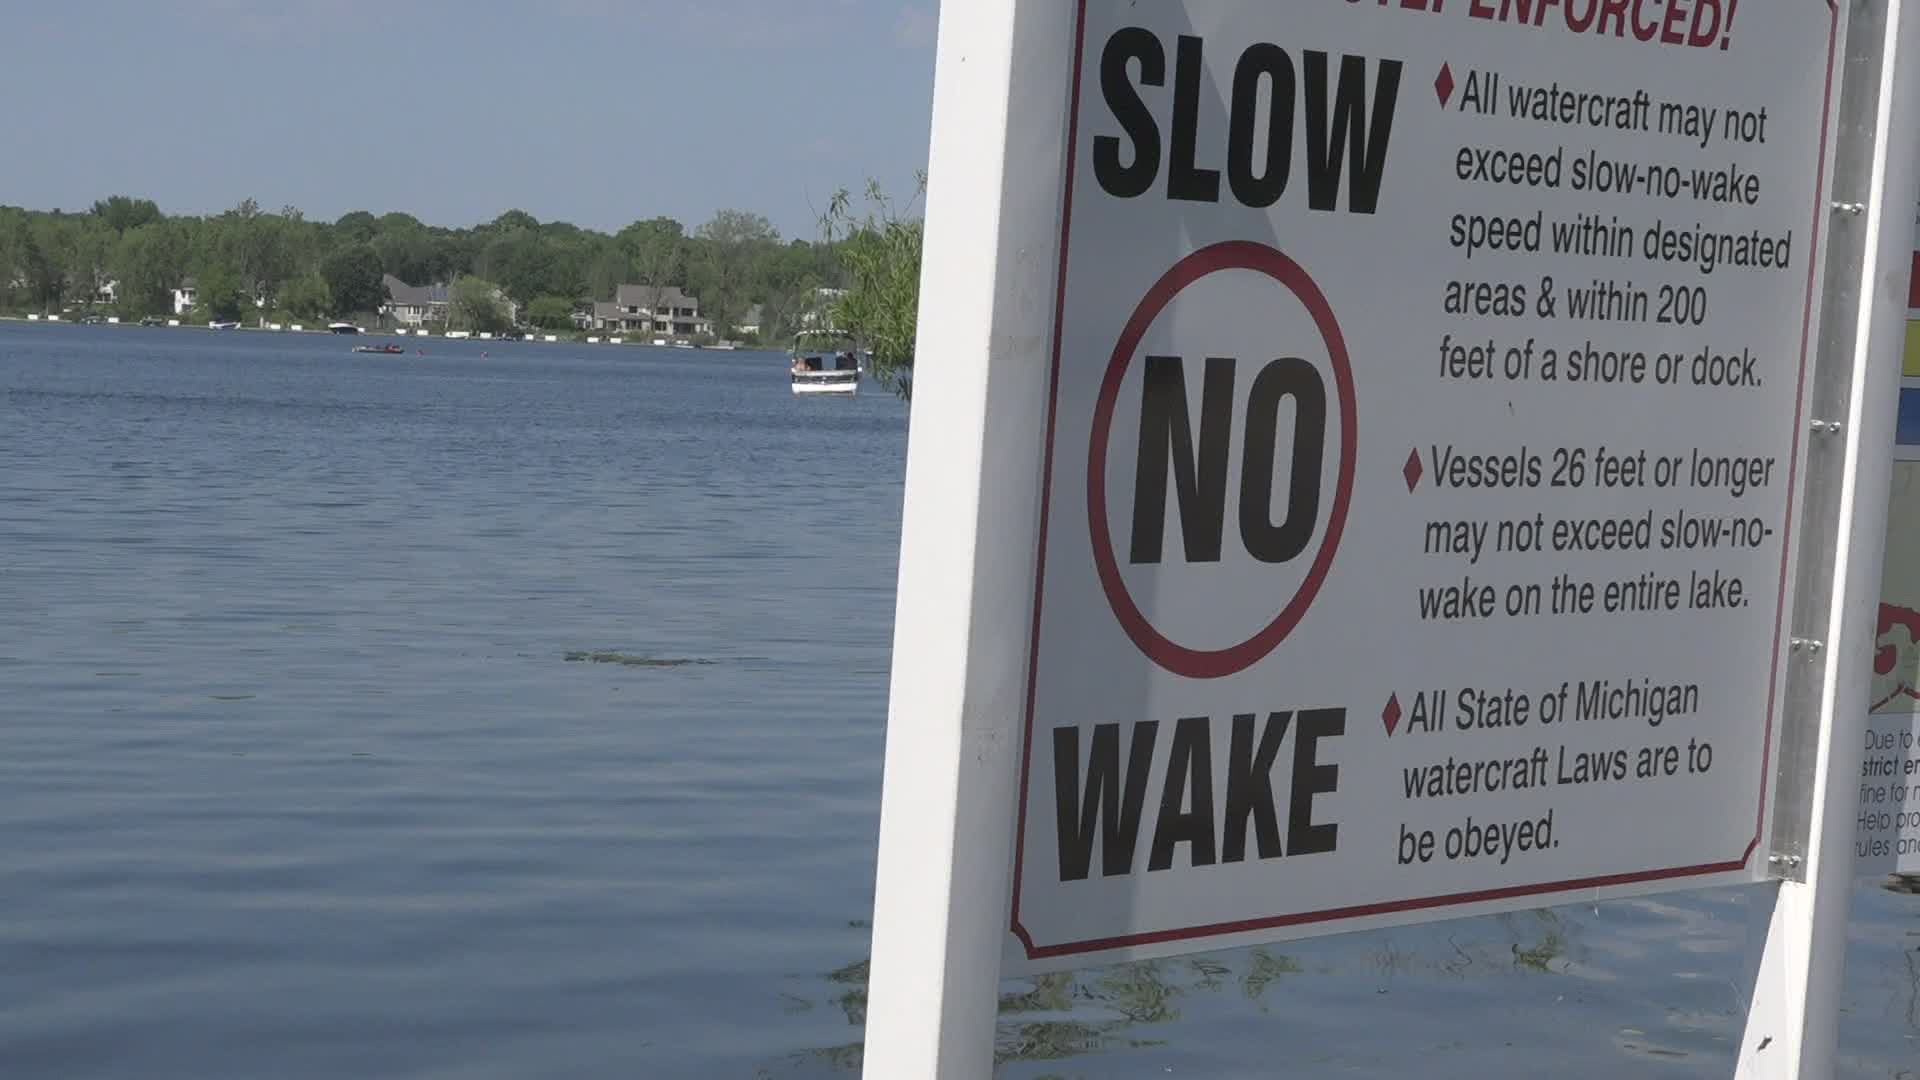 Homeowners are concerned that boaters will destroy their property by not following the "No Wake" rules.